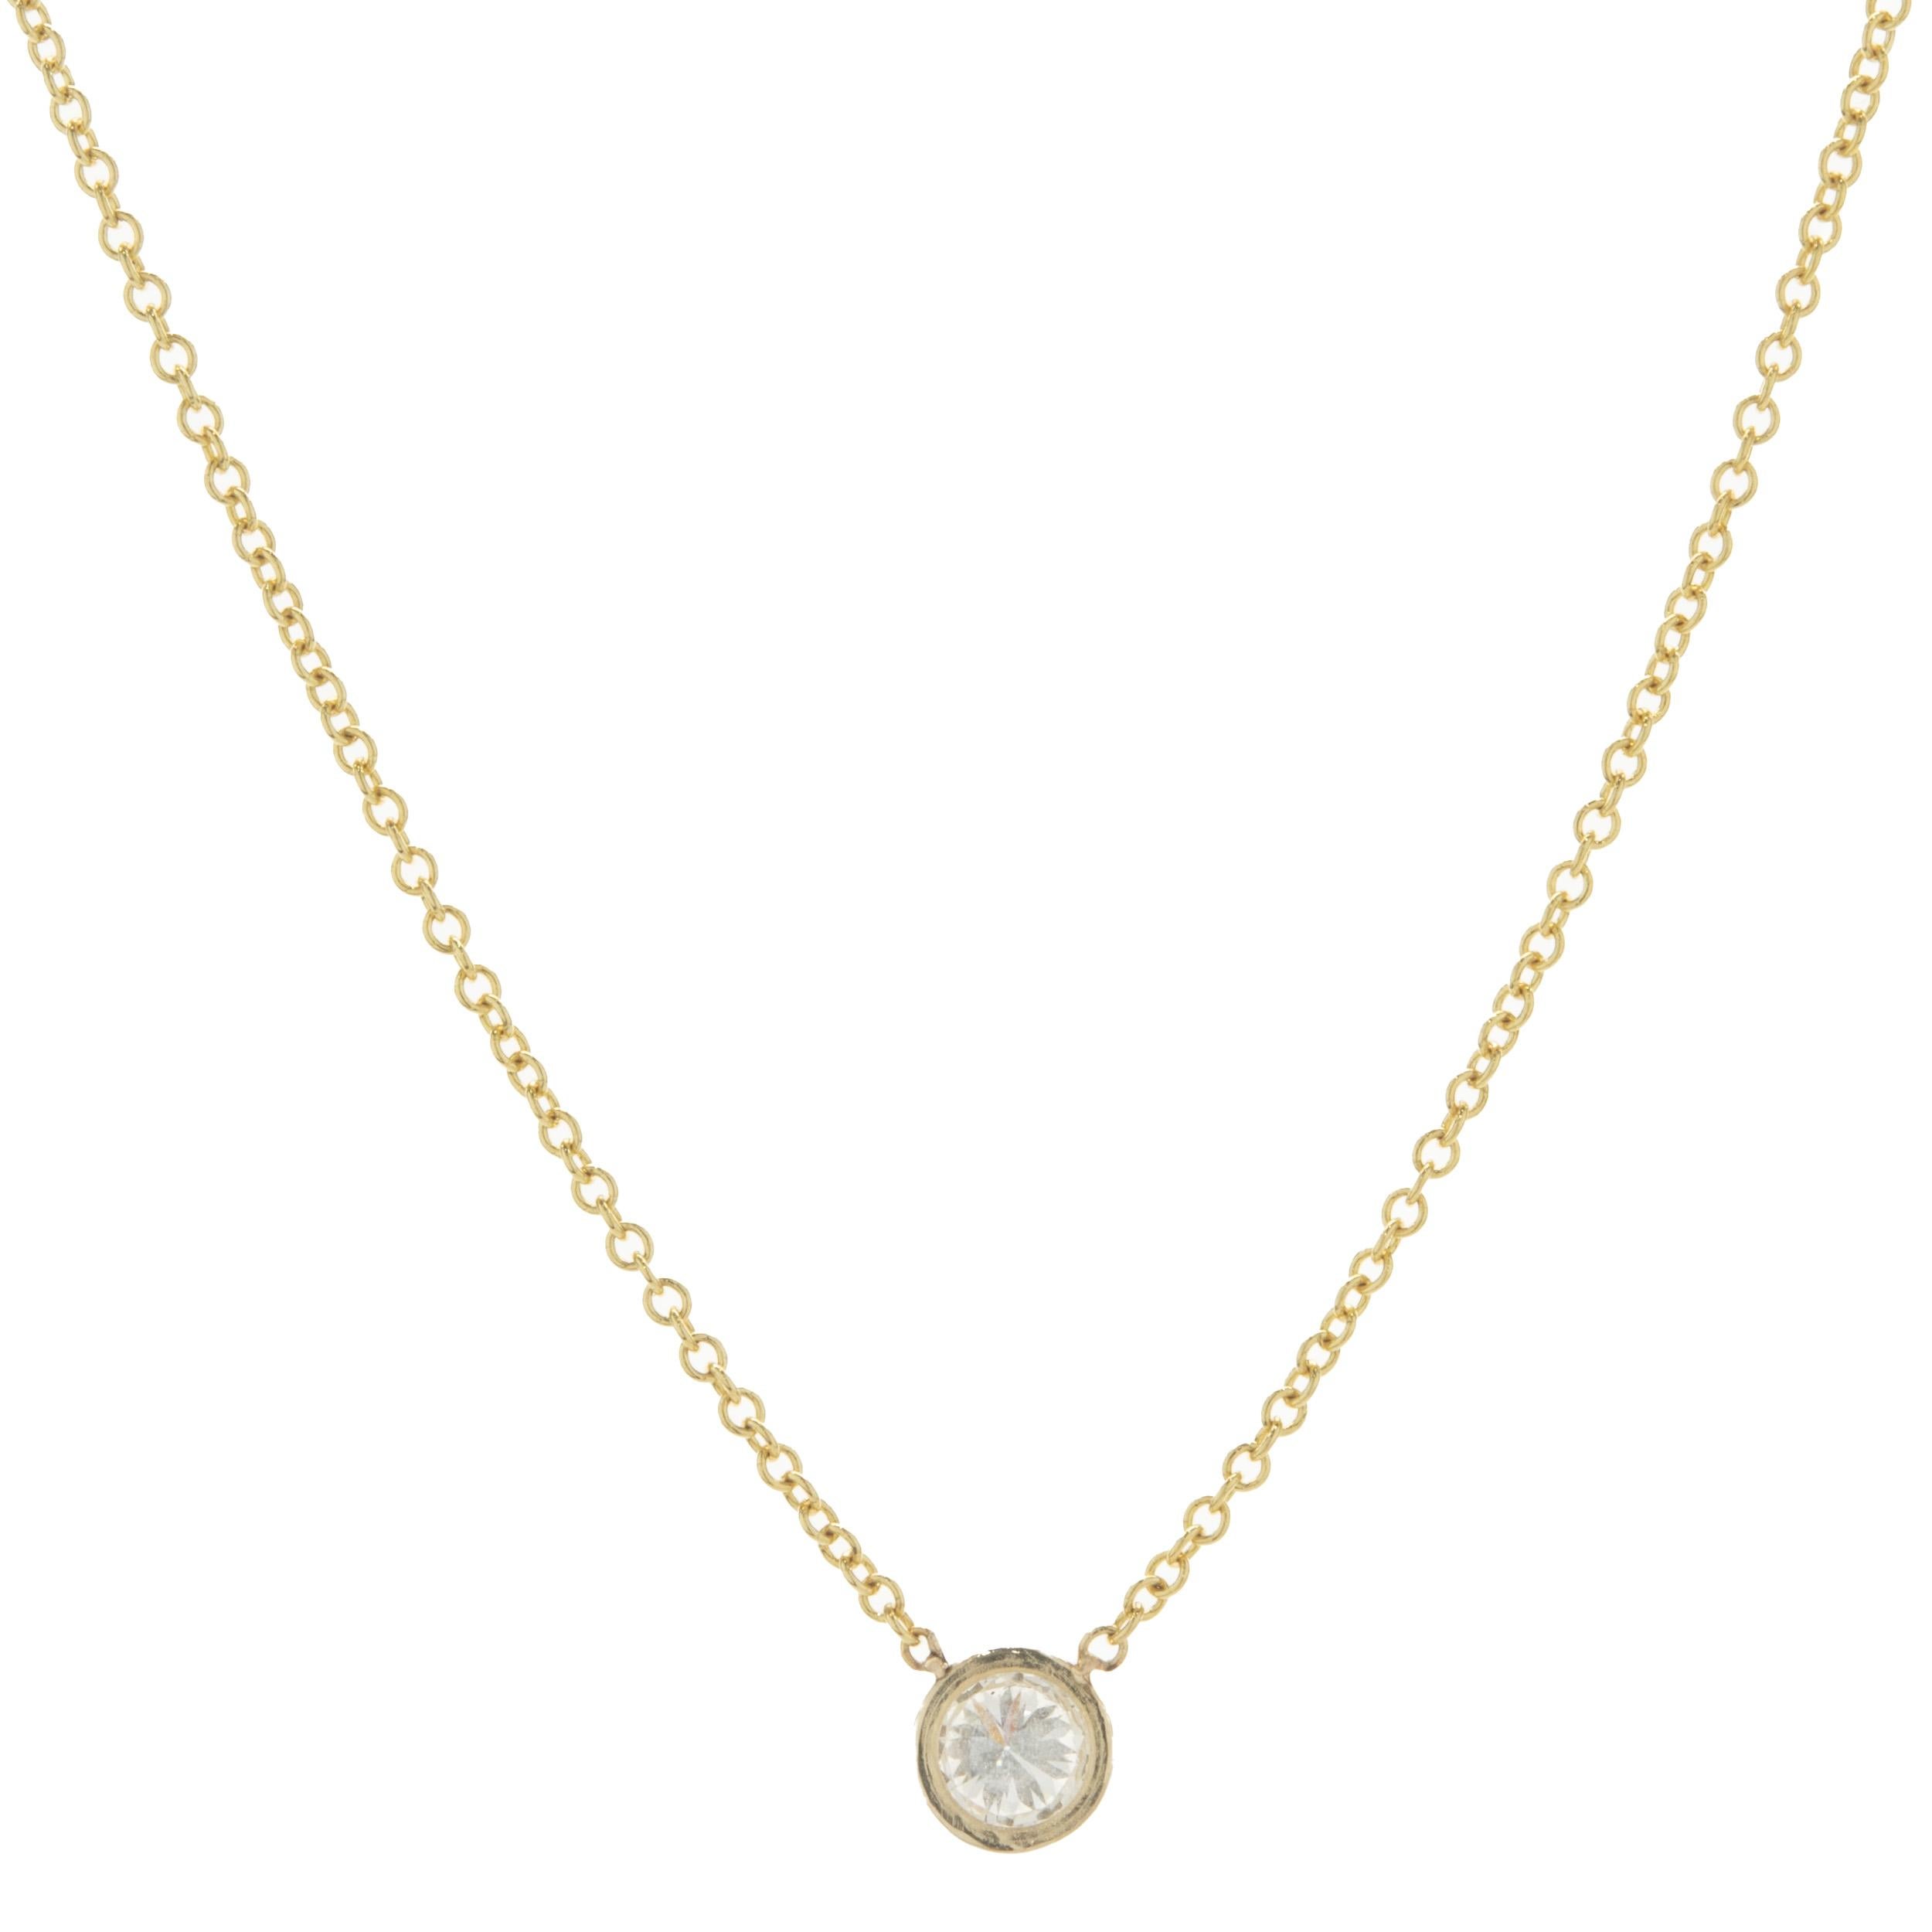 Designer: custom design
Material: 14K yellow gold
Diamond: 1 round brilliant cut = 0.17cttw
Color: G
Clarity: SI1
Dimensions: necklace measures 18-inches in length 
Weight: 1.34 grams